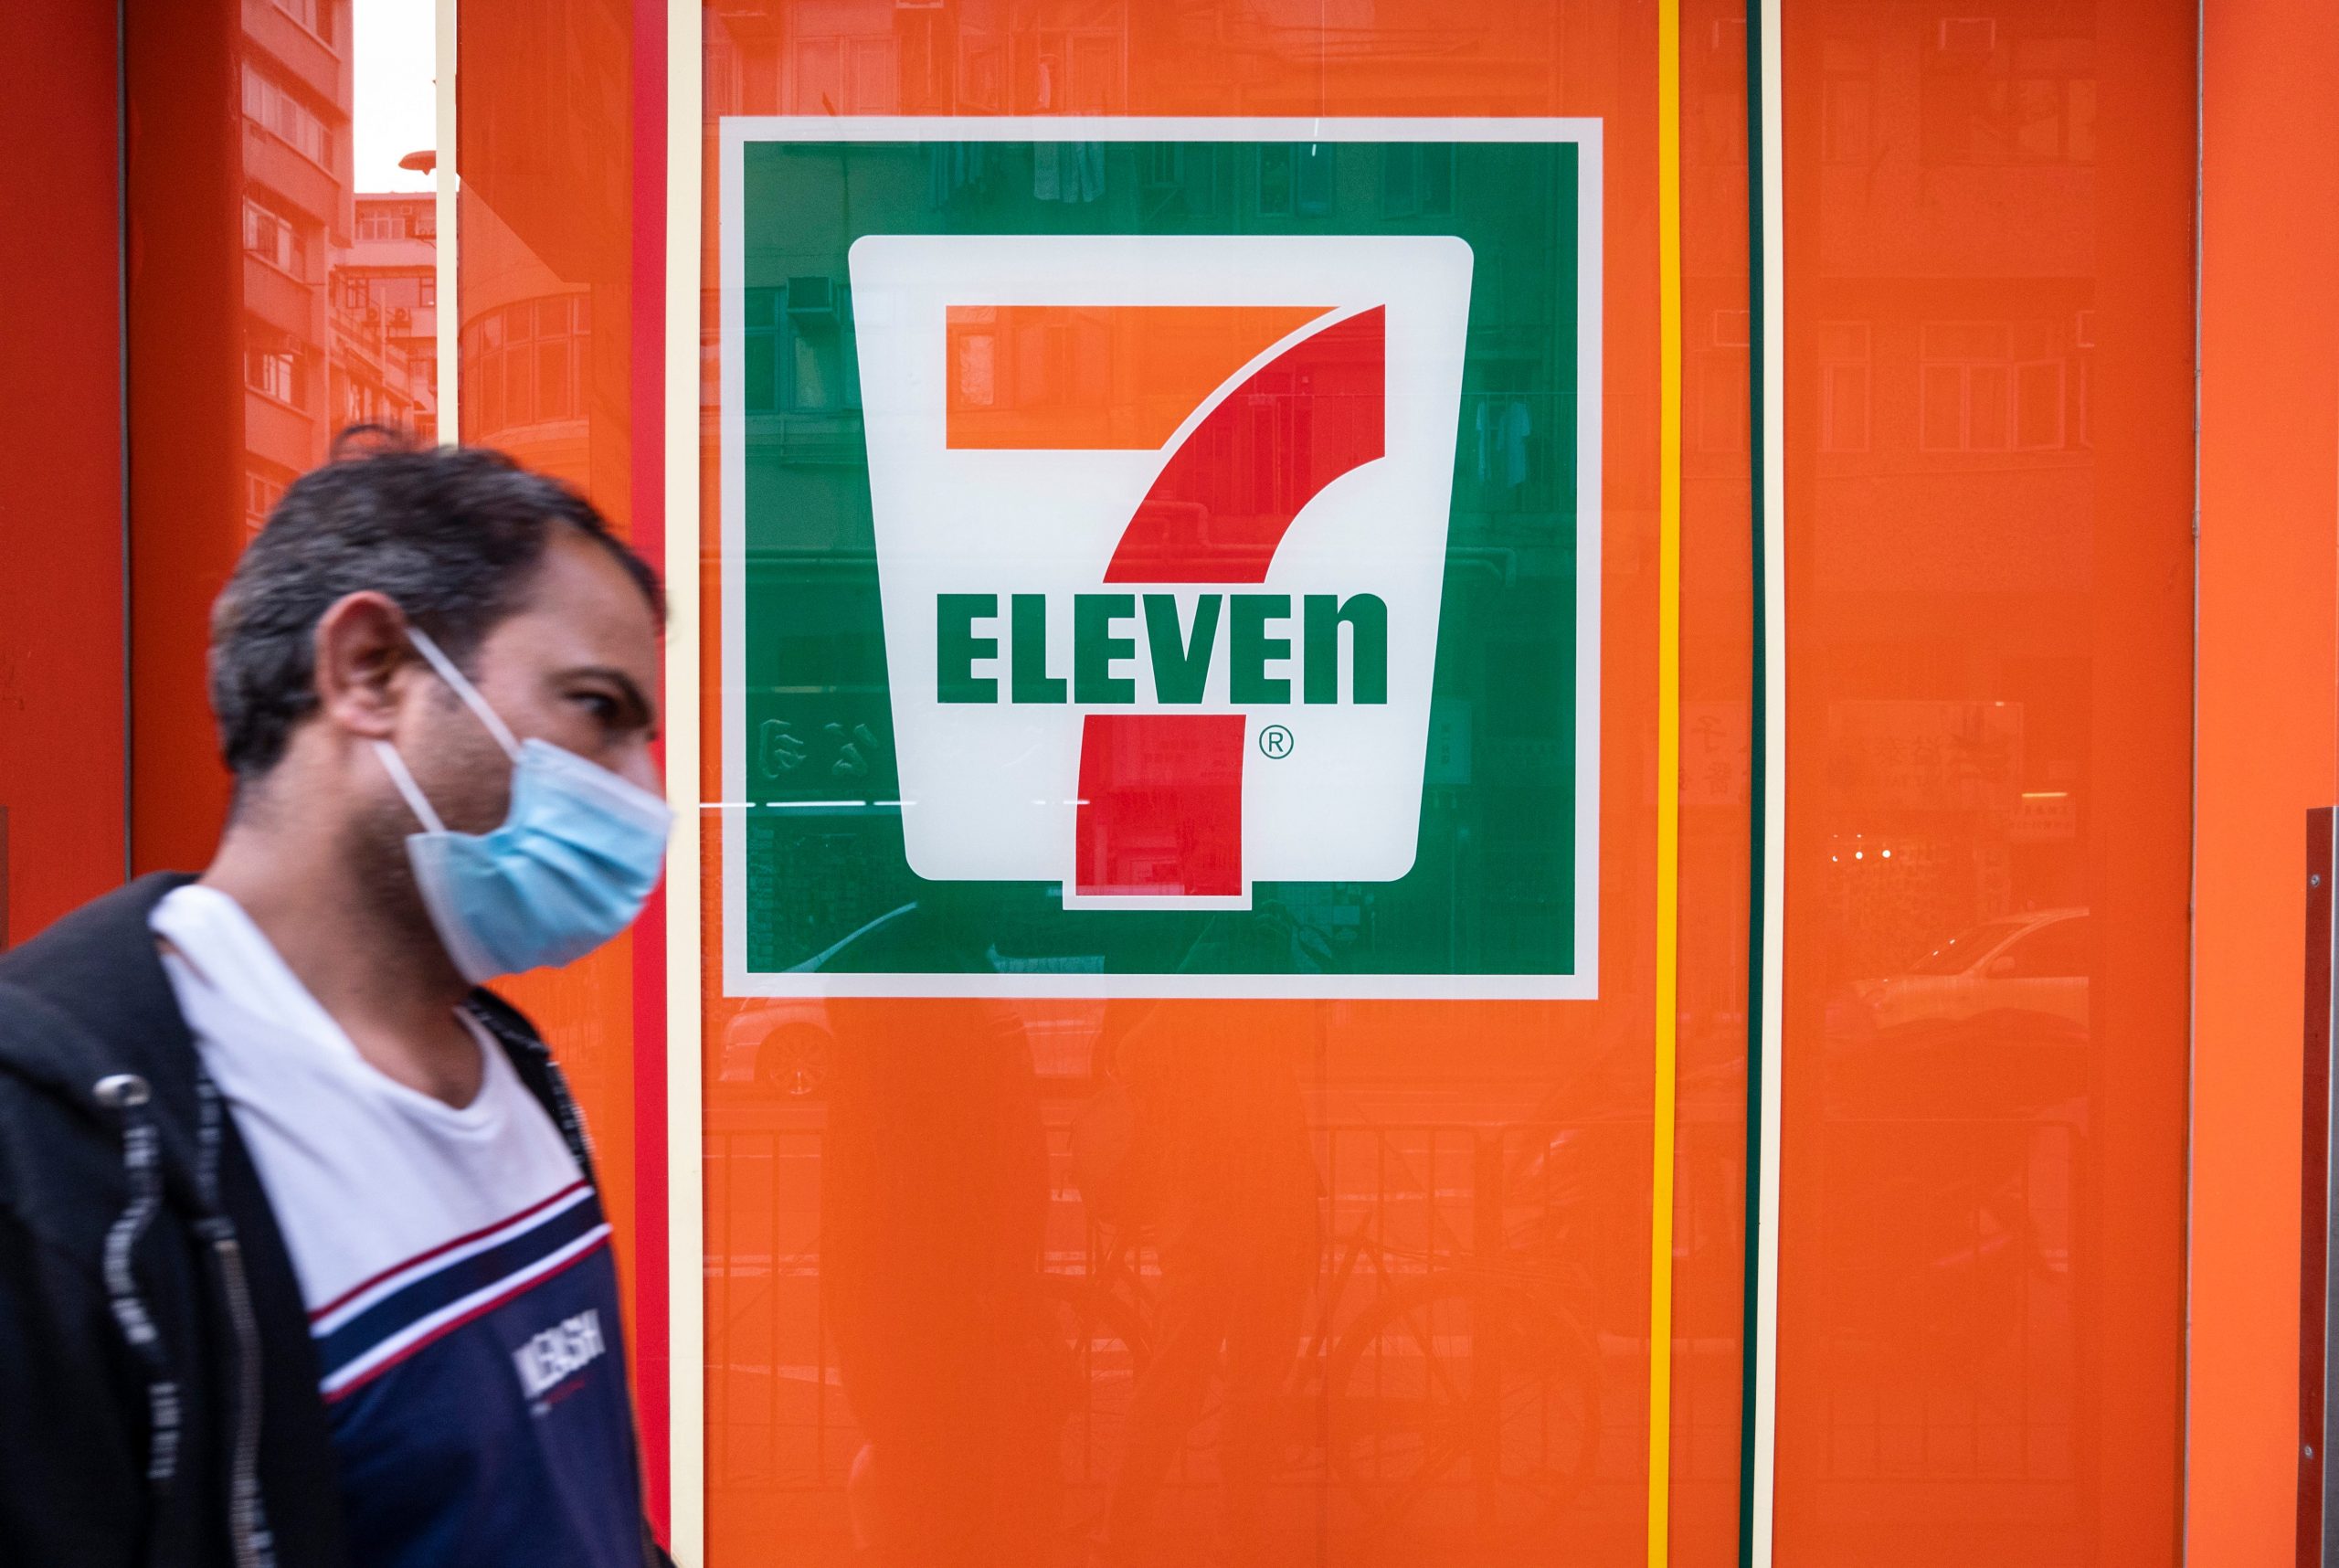 A man wearing a facemask walks past a 7-Eleven sign on an orange wall